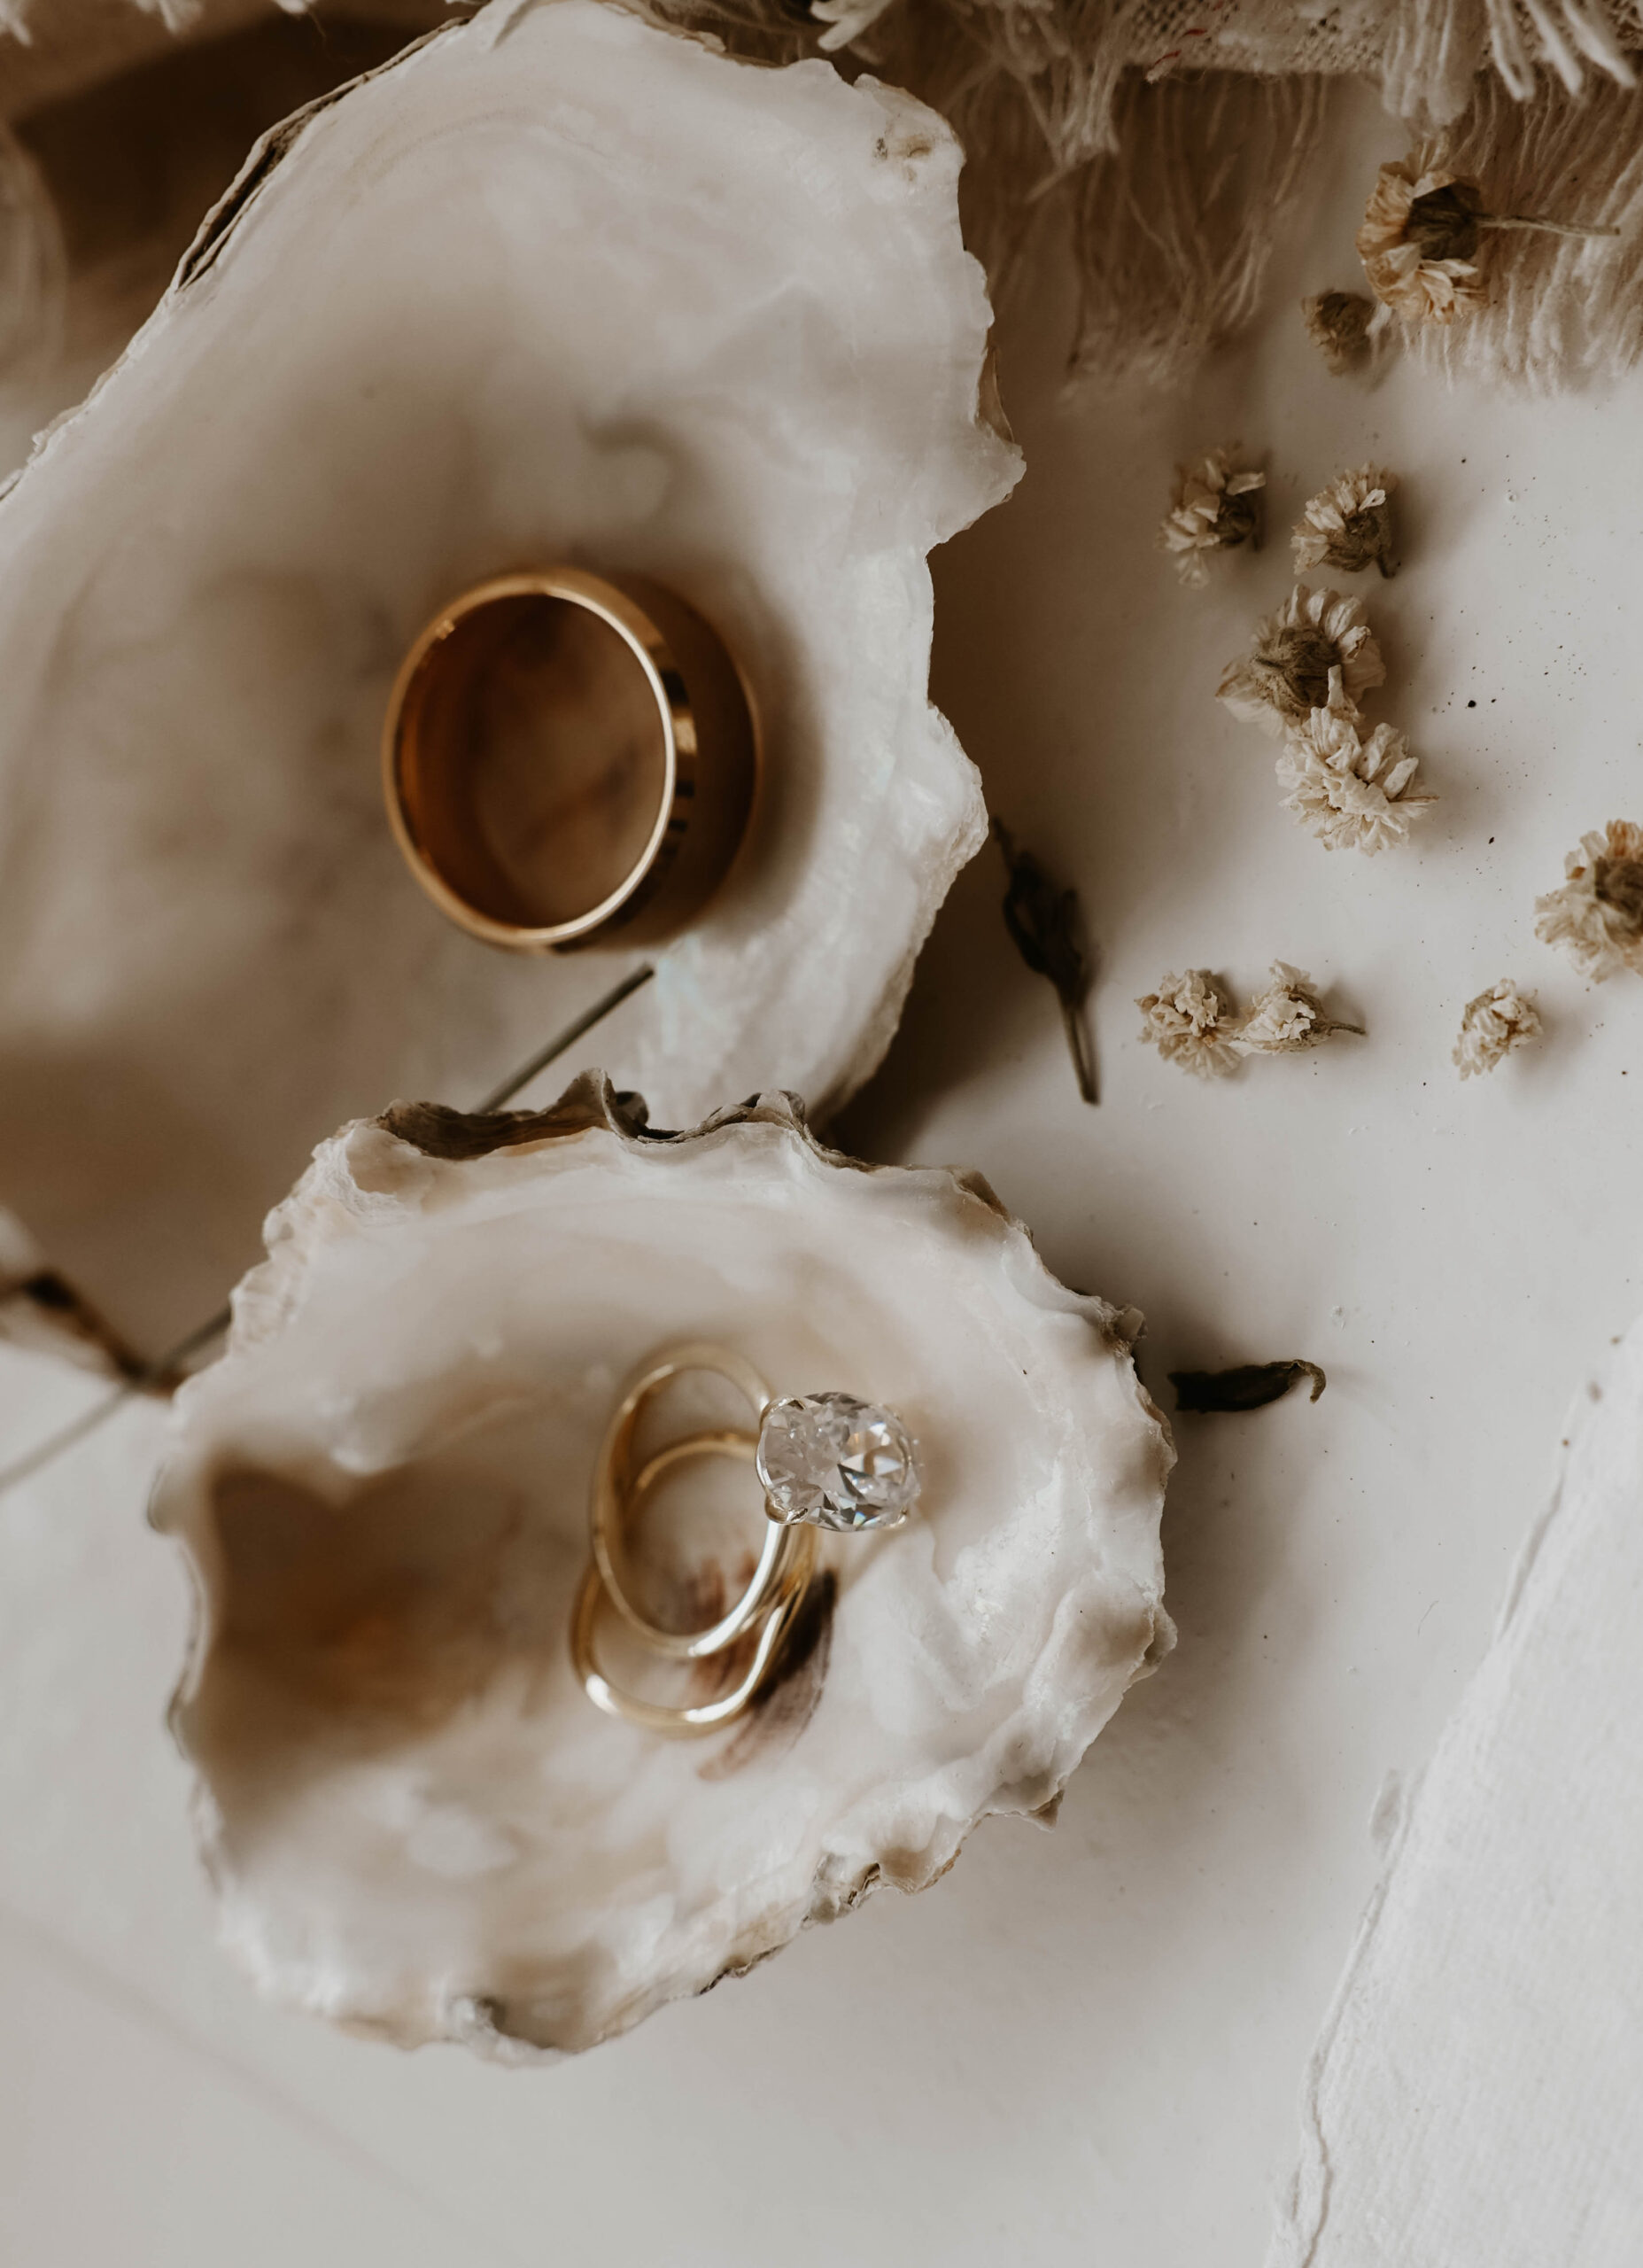 oyster shells holding wedding rings